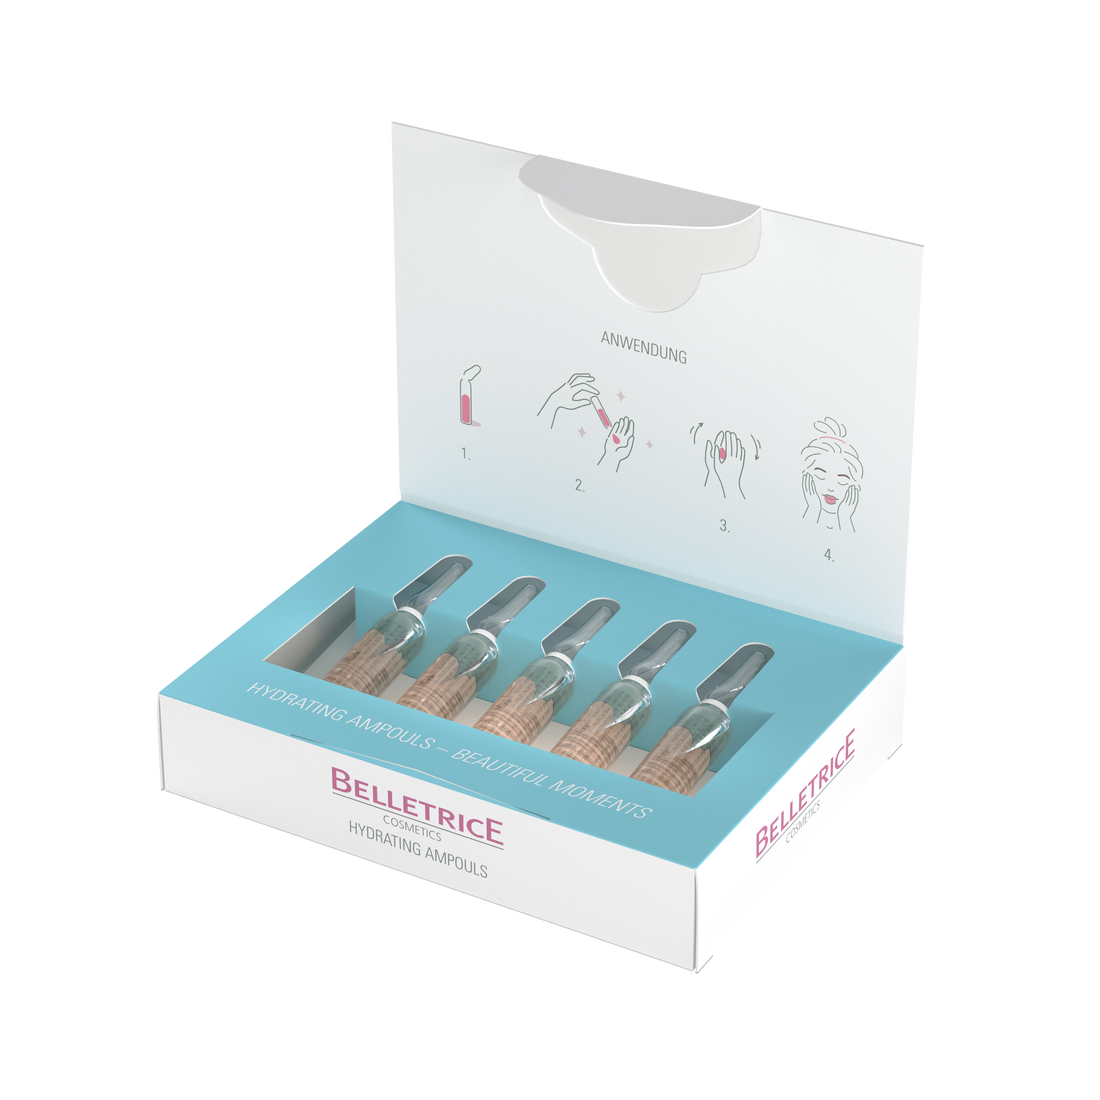 Hydrating ampoules